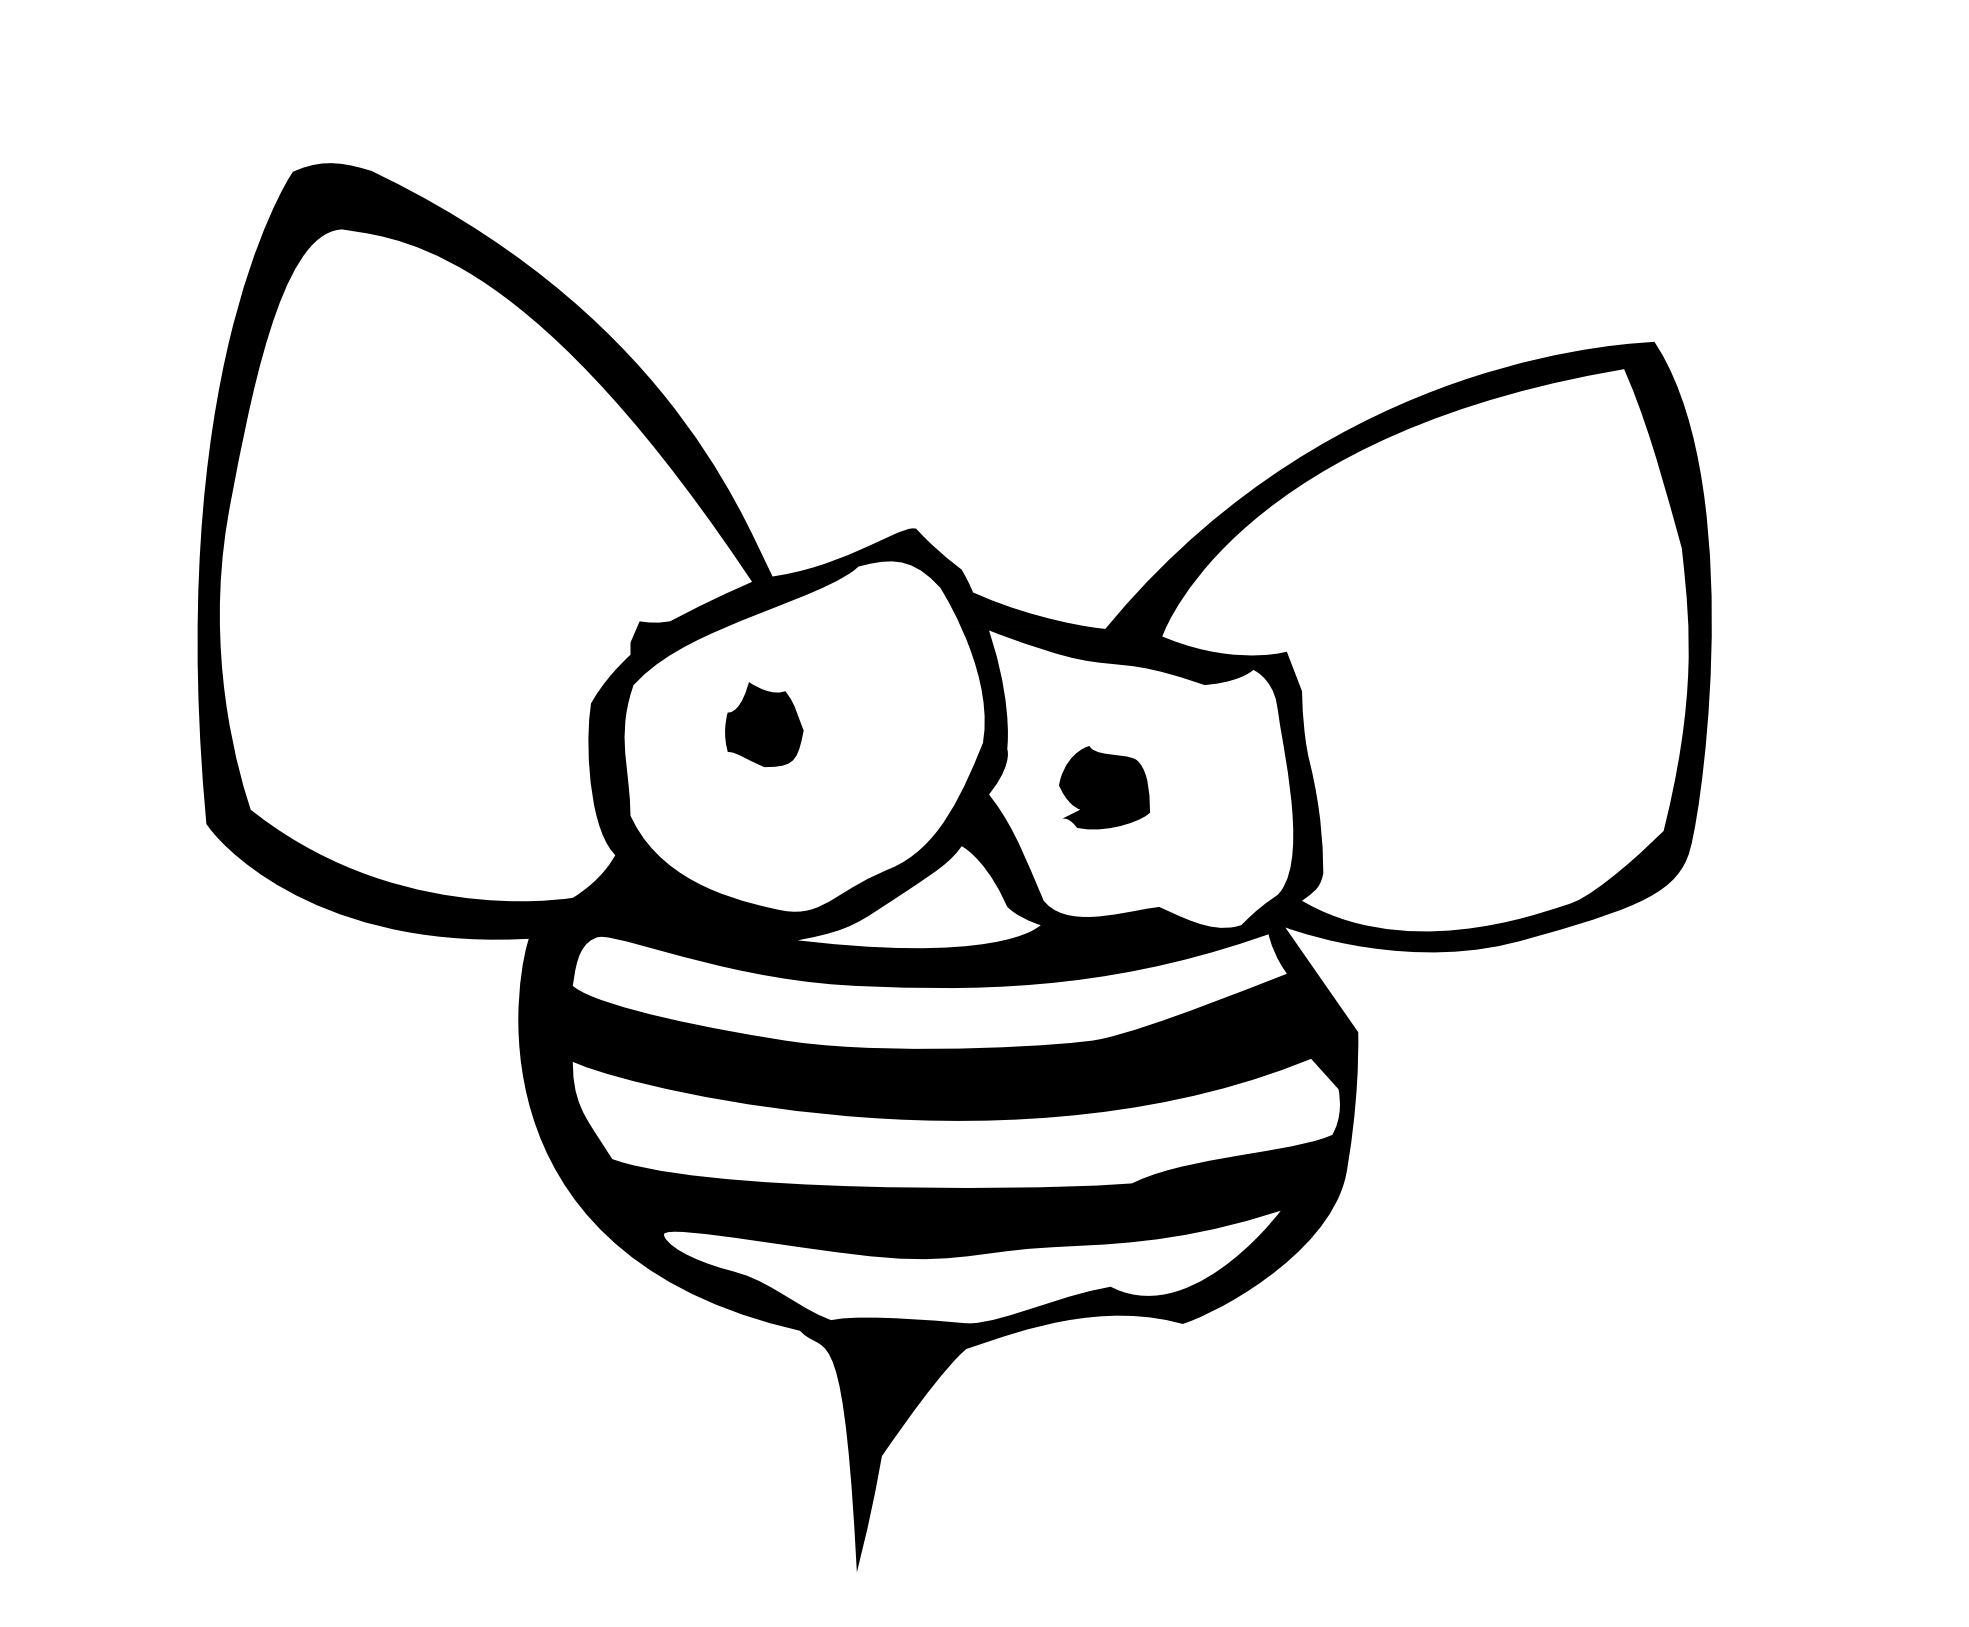 free bee clipart black and white - photo #9